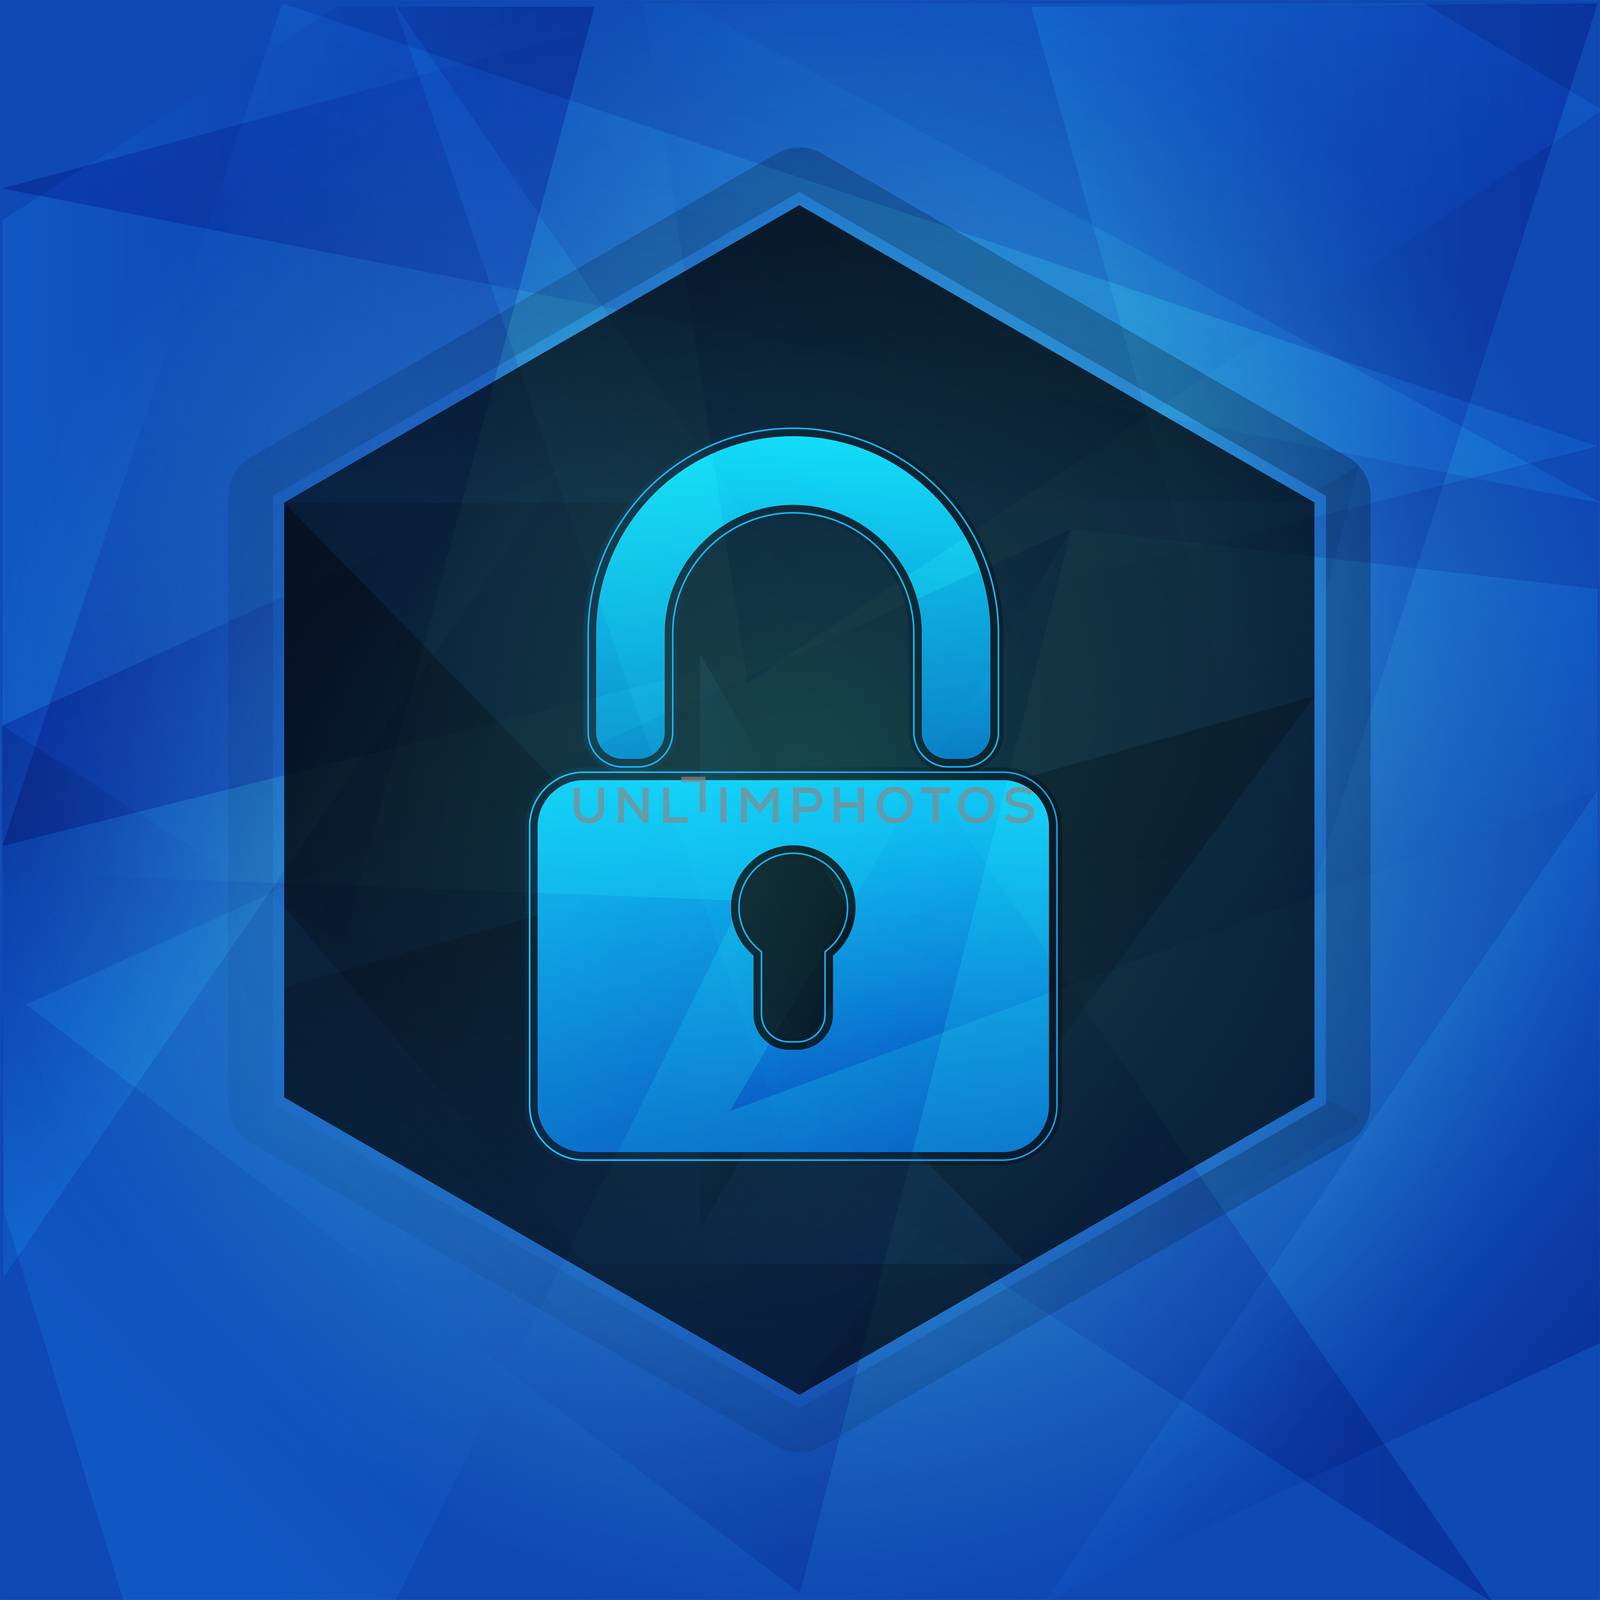 padlock sign over blue background with flat design hexagons, internet technology security concept symbol